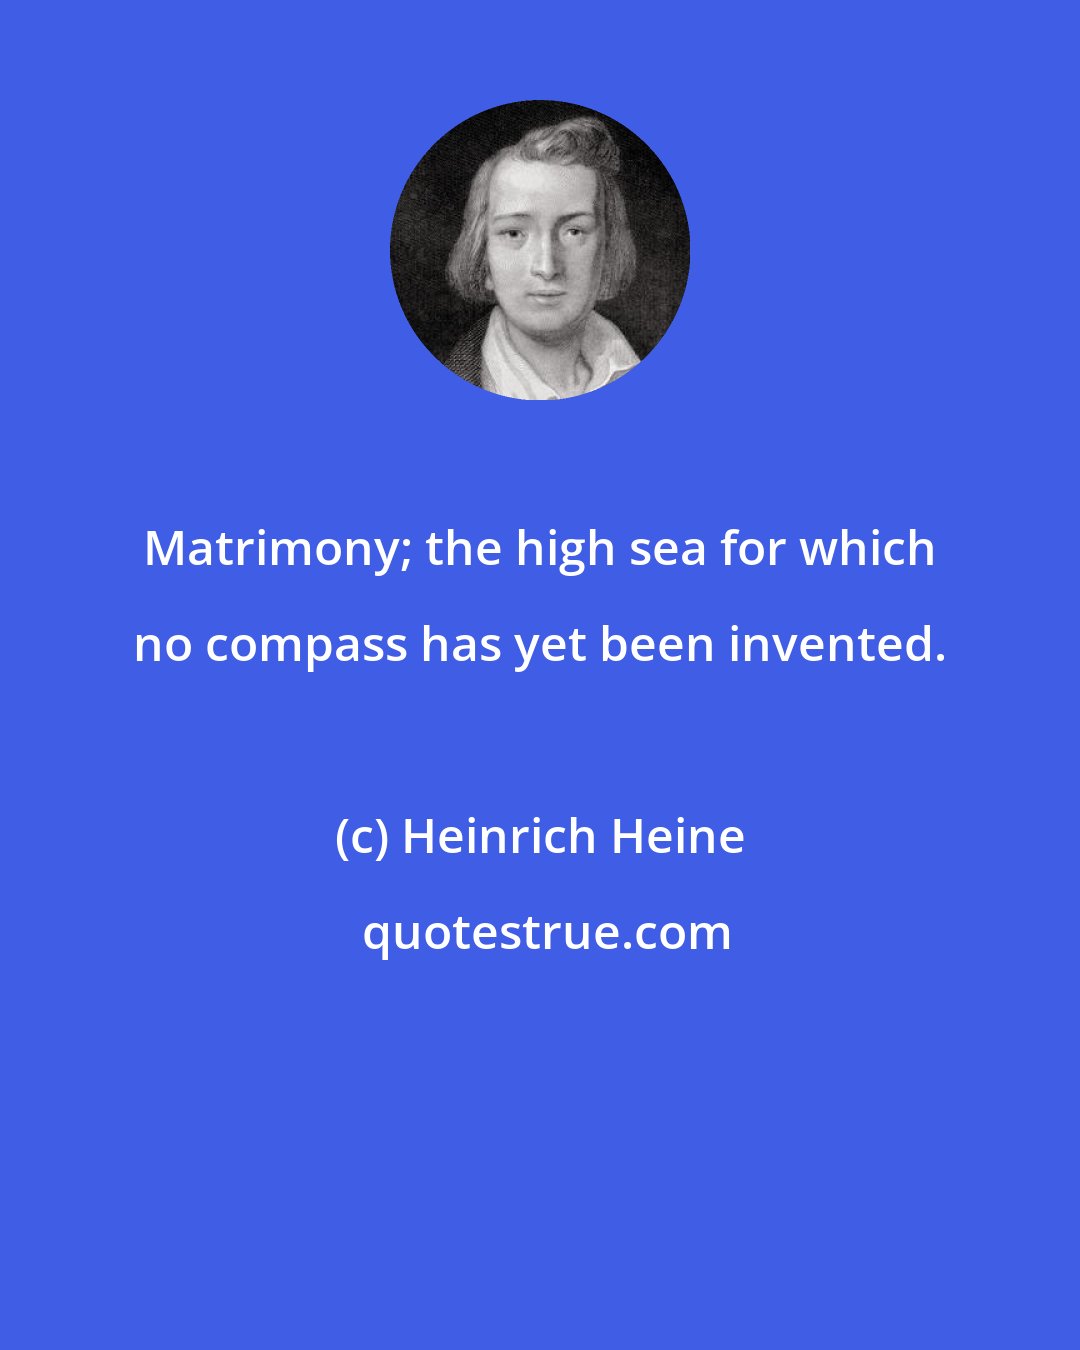 Heinrich Heine: Matrimony; the high sea for which no compass has yet been invented.